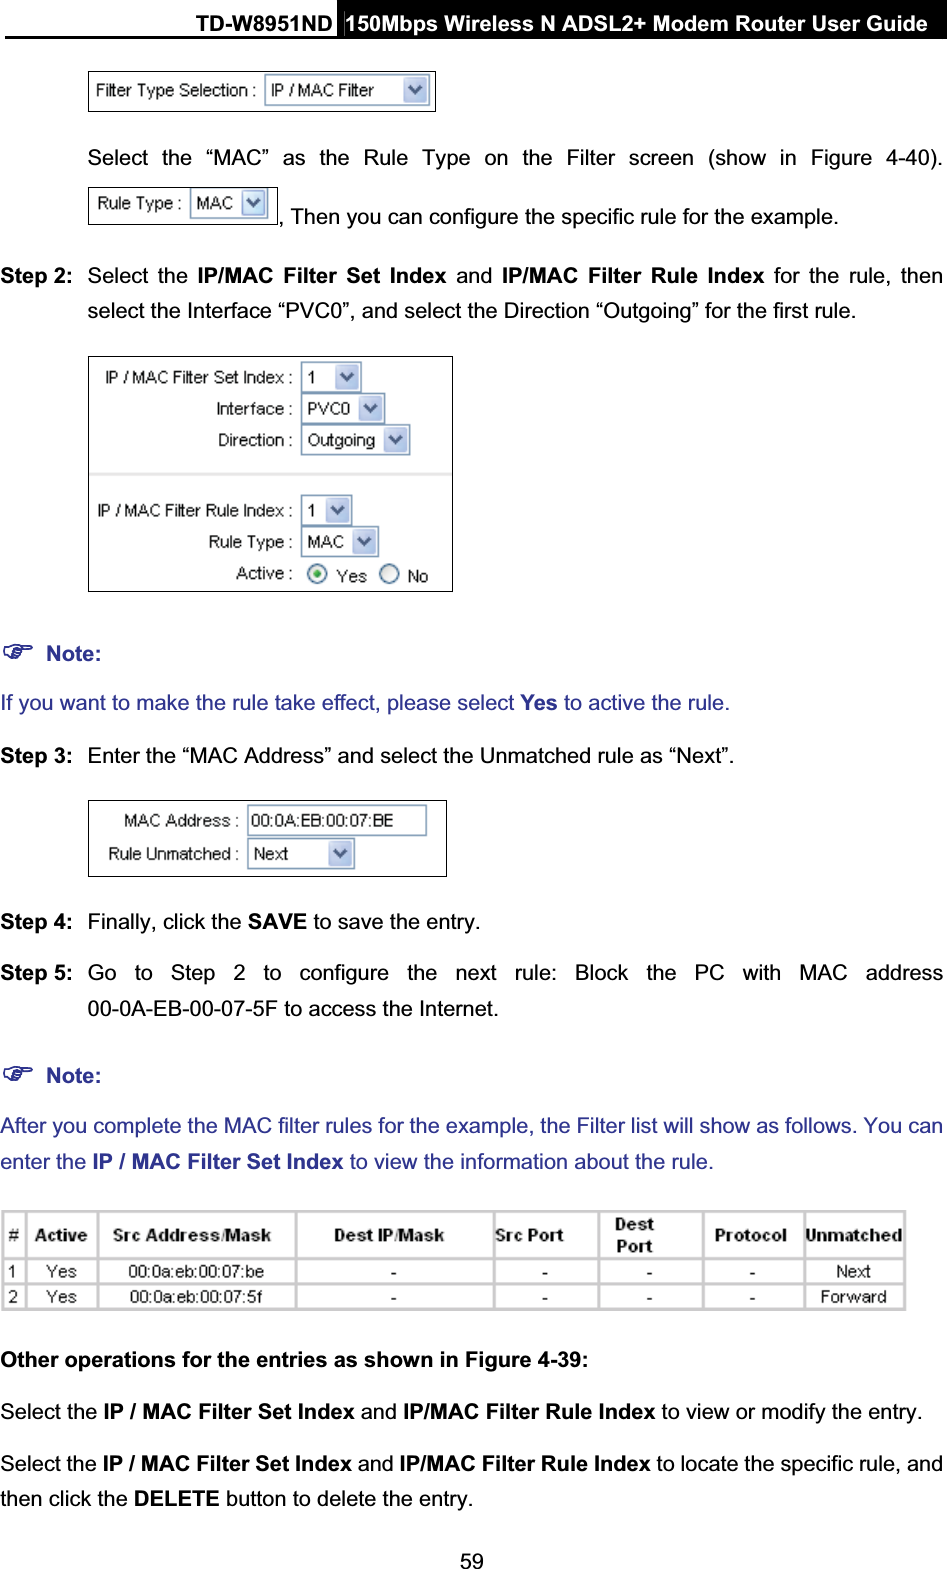 TD-W8951ND  150Mbps Wireless N ADSL2+ Modem Router User Guide59Select the “MAC” as the Rule Type on the Filter screen (show in Figure 4-40). , Then you can configure the specific rule for the example. Step 2:  Select the IP/MAC Filter Set Index and IP/MAC Filter Rule Index for the rule, then select the Interface “PVC0”, and select the Direction “Outgoing” for the first rule. )Note:If you want to make the rule take effect, please select Yes to active the rule. Step 3:  Enter the “MAC Address” and select the Unmatched rule as “Next”. Step 4:  Finally, click the SAVE to save the entry.Step 5:  Go to Step 2 to configure the next rule: Block the PC with MAC address 00-0A-EB-00-07-5F to access the Internet.)Note:After you complete the MAC filter rules for the example, the Filter list will show as follows. You can enter the IP / MAC Filter Set Index to view the information about the rule. Other operations for the entries as shown in Figure 4-39: Select the IP / MAC Filter Set Index and IP/MAC Filter Rule Index to view or modify the entry. Select the IP / MAC Filter Set Index and IP/MAC Filter Rule Index to locate the specific rule, and then click the DELETE button to delete the entry. 